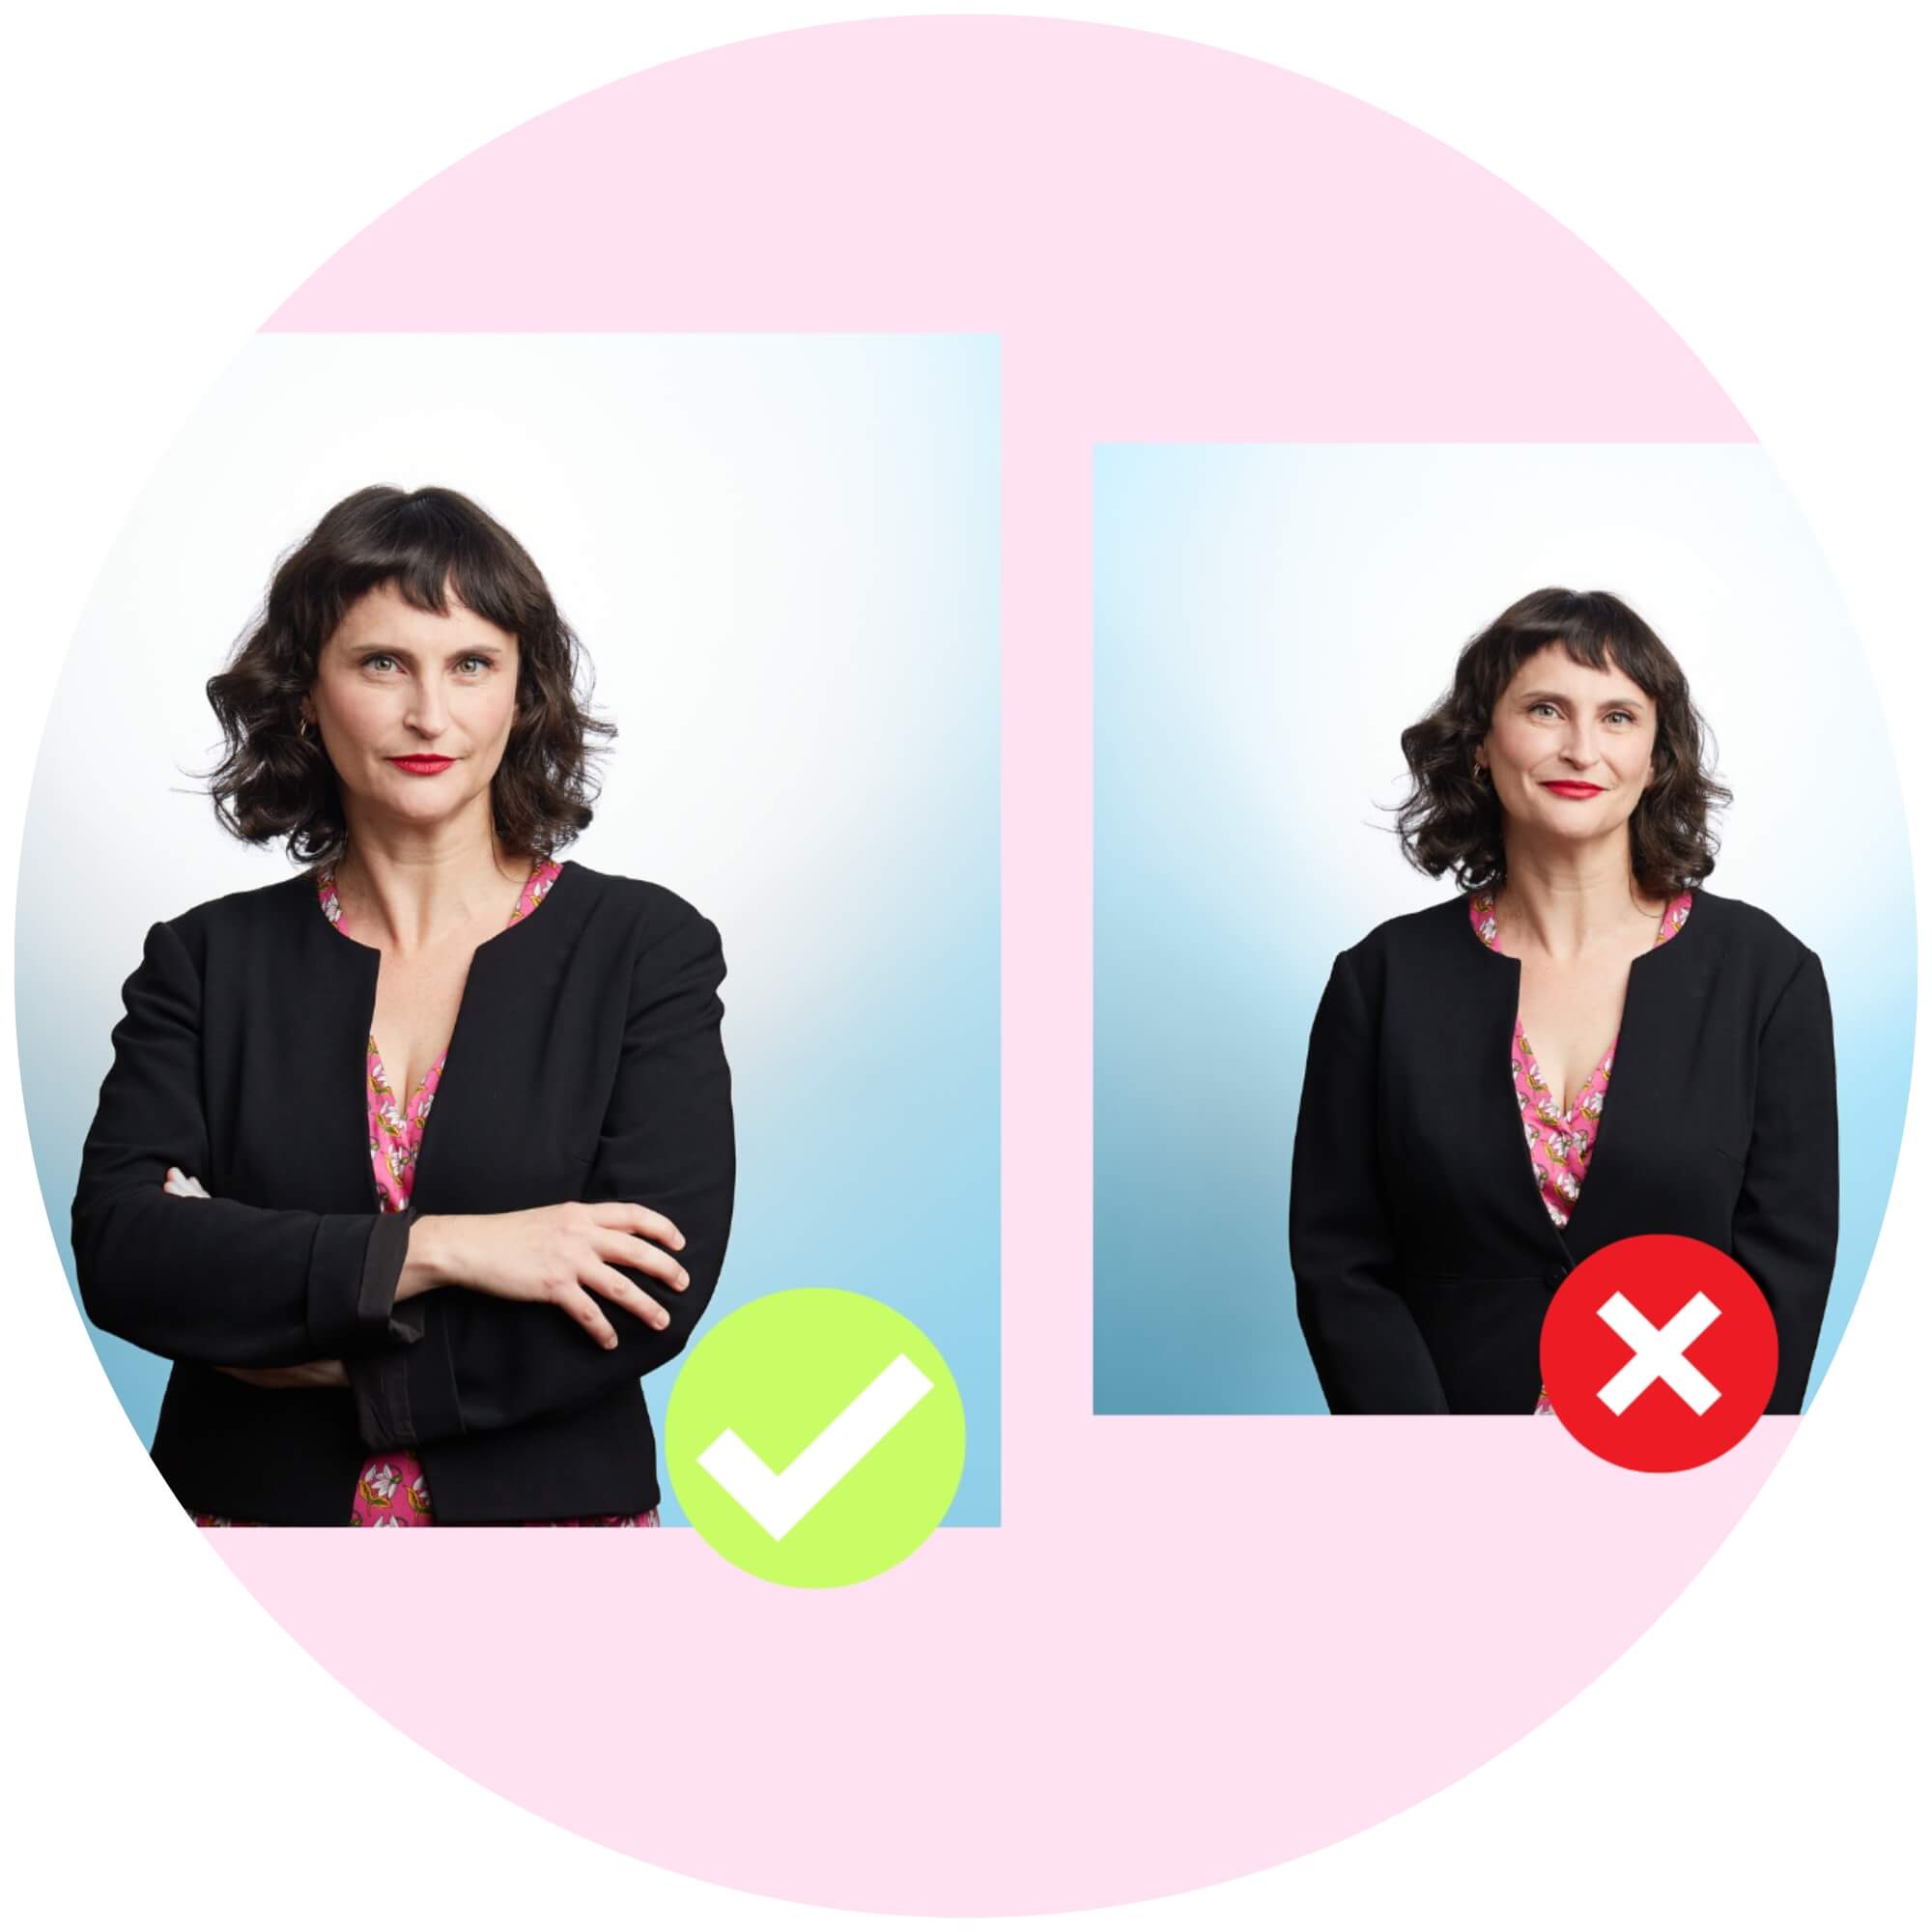 Infographic of an example of a pose to give you more confidence in photos. There's 2 photos of same woman. The confident pose she has her arms folded across her chest. In the other her arms are dangling beside her awkwardly.